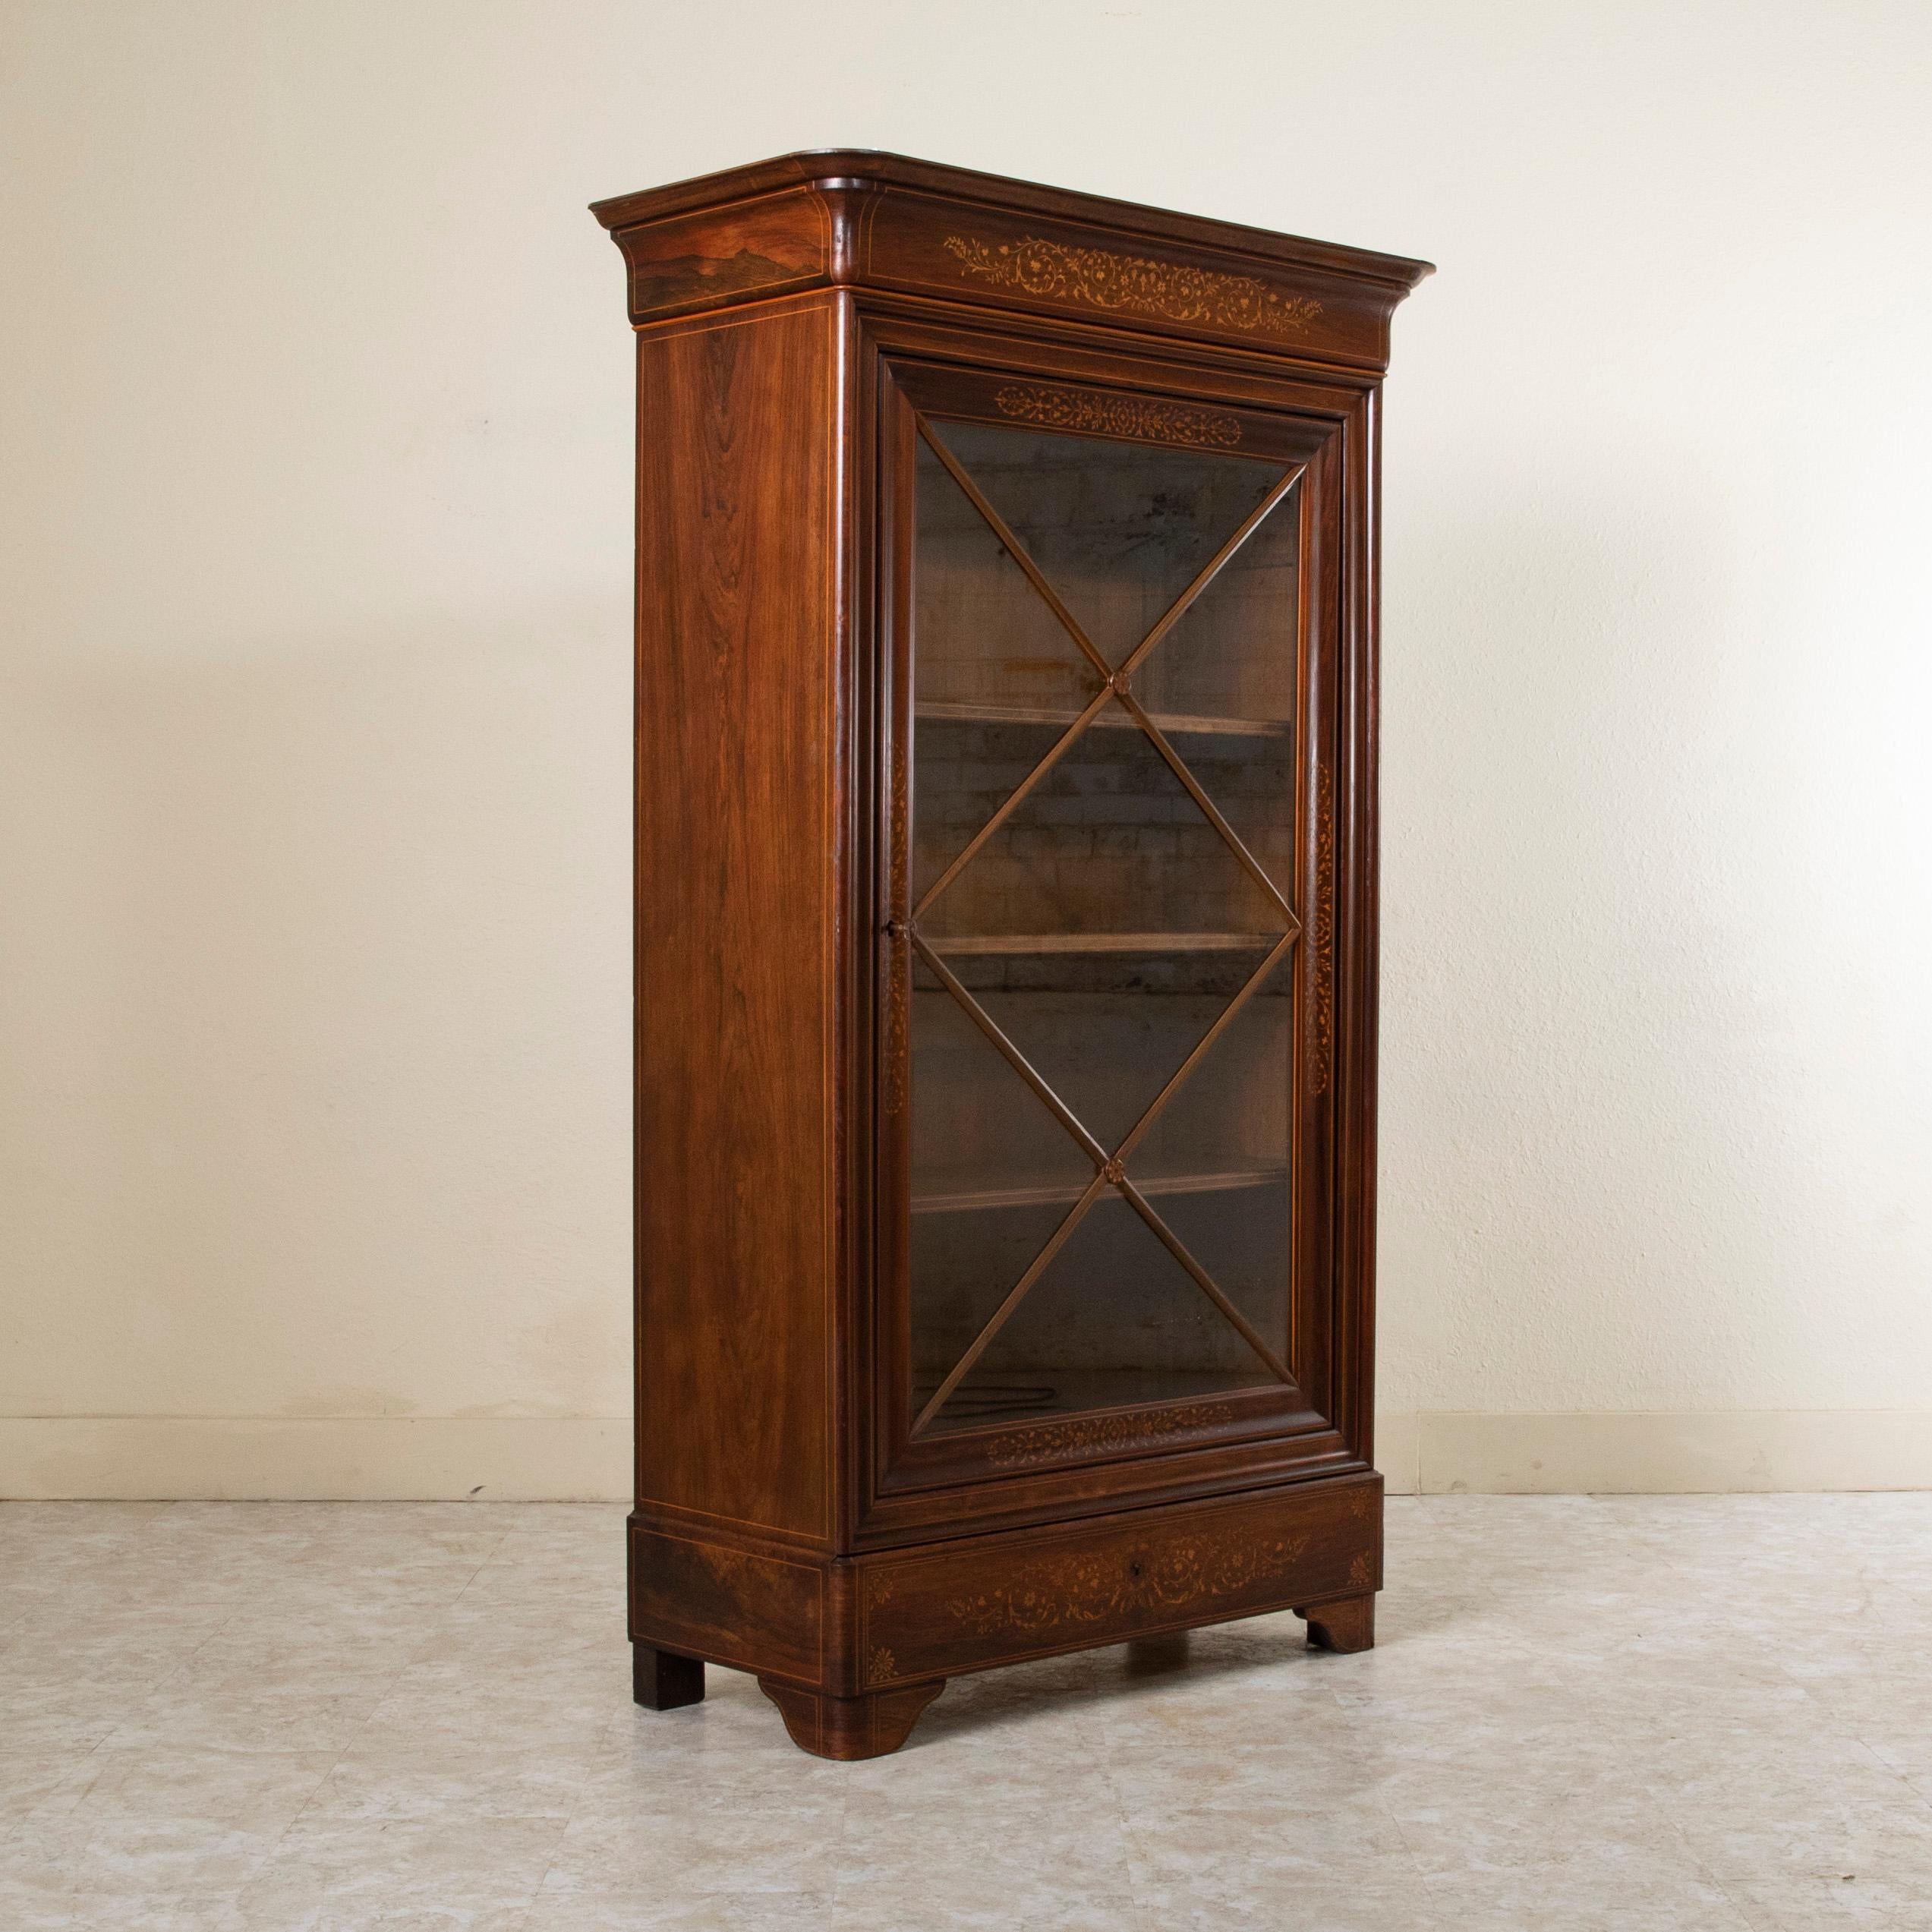 A unique piece from a short period of time in French furniture making, this early nineteenth century French Charles X period mahogany vitrine or bookcase features fine lines of lemon wood inlay outlining the face and each side of the cabinet.